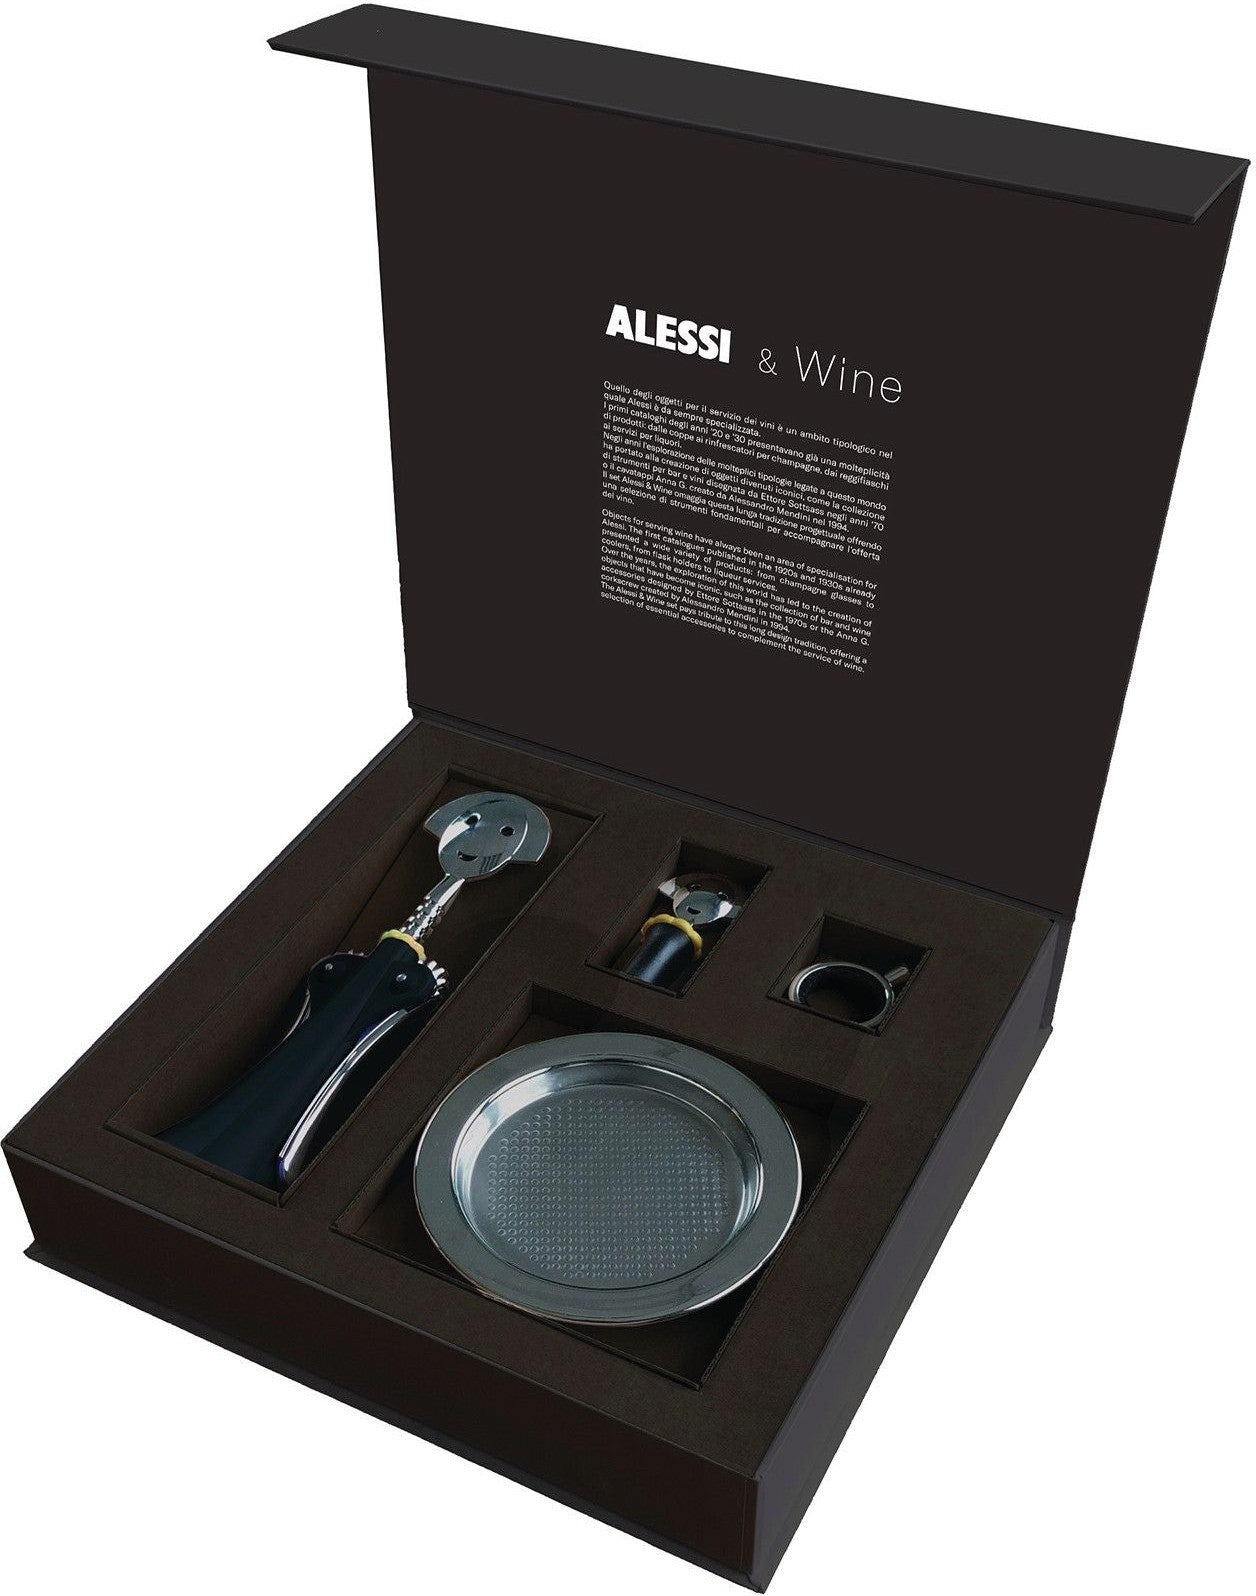 Alessi Alessi & Wine Anna G. Set Your Wine Is Served!